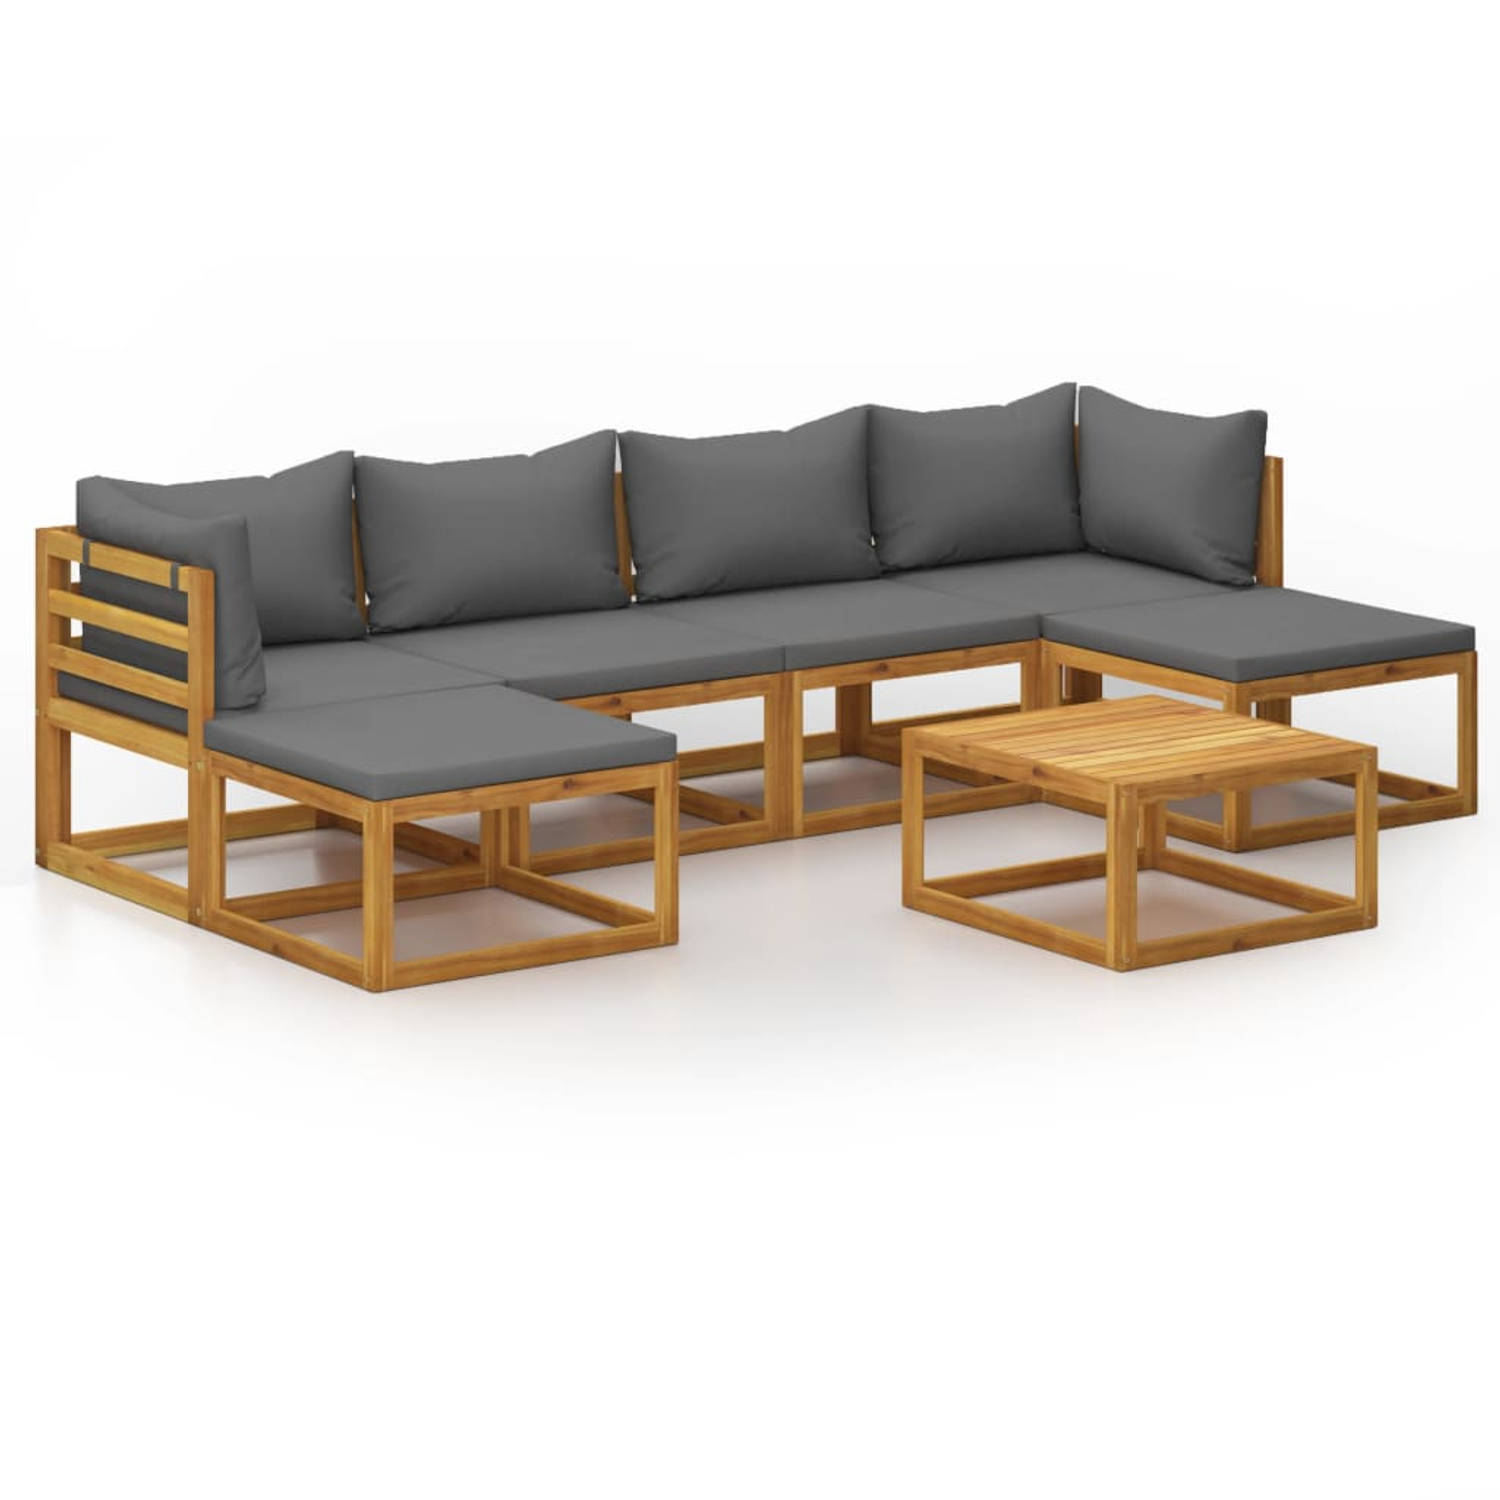 The Living Store 7-delige Loungeset met kussens massief acaciahout - Tuinset